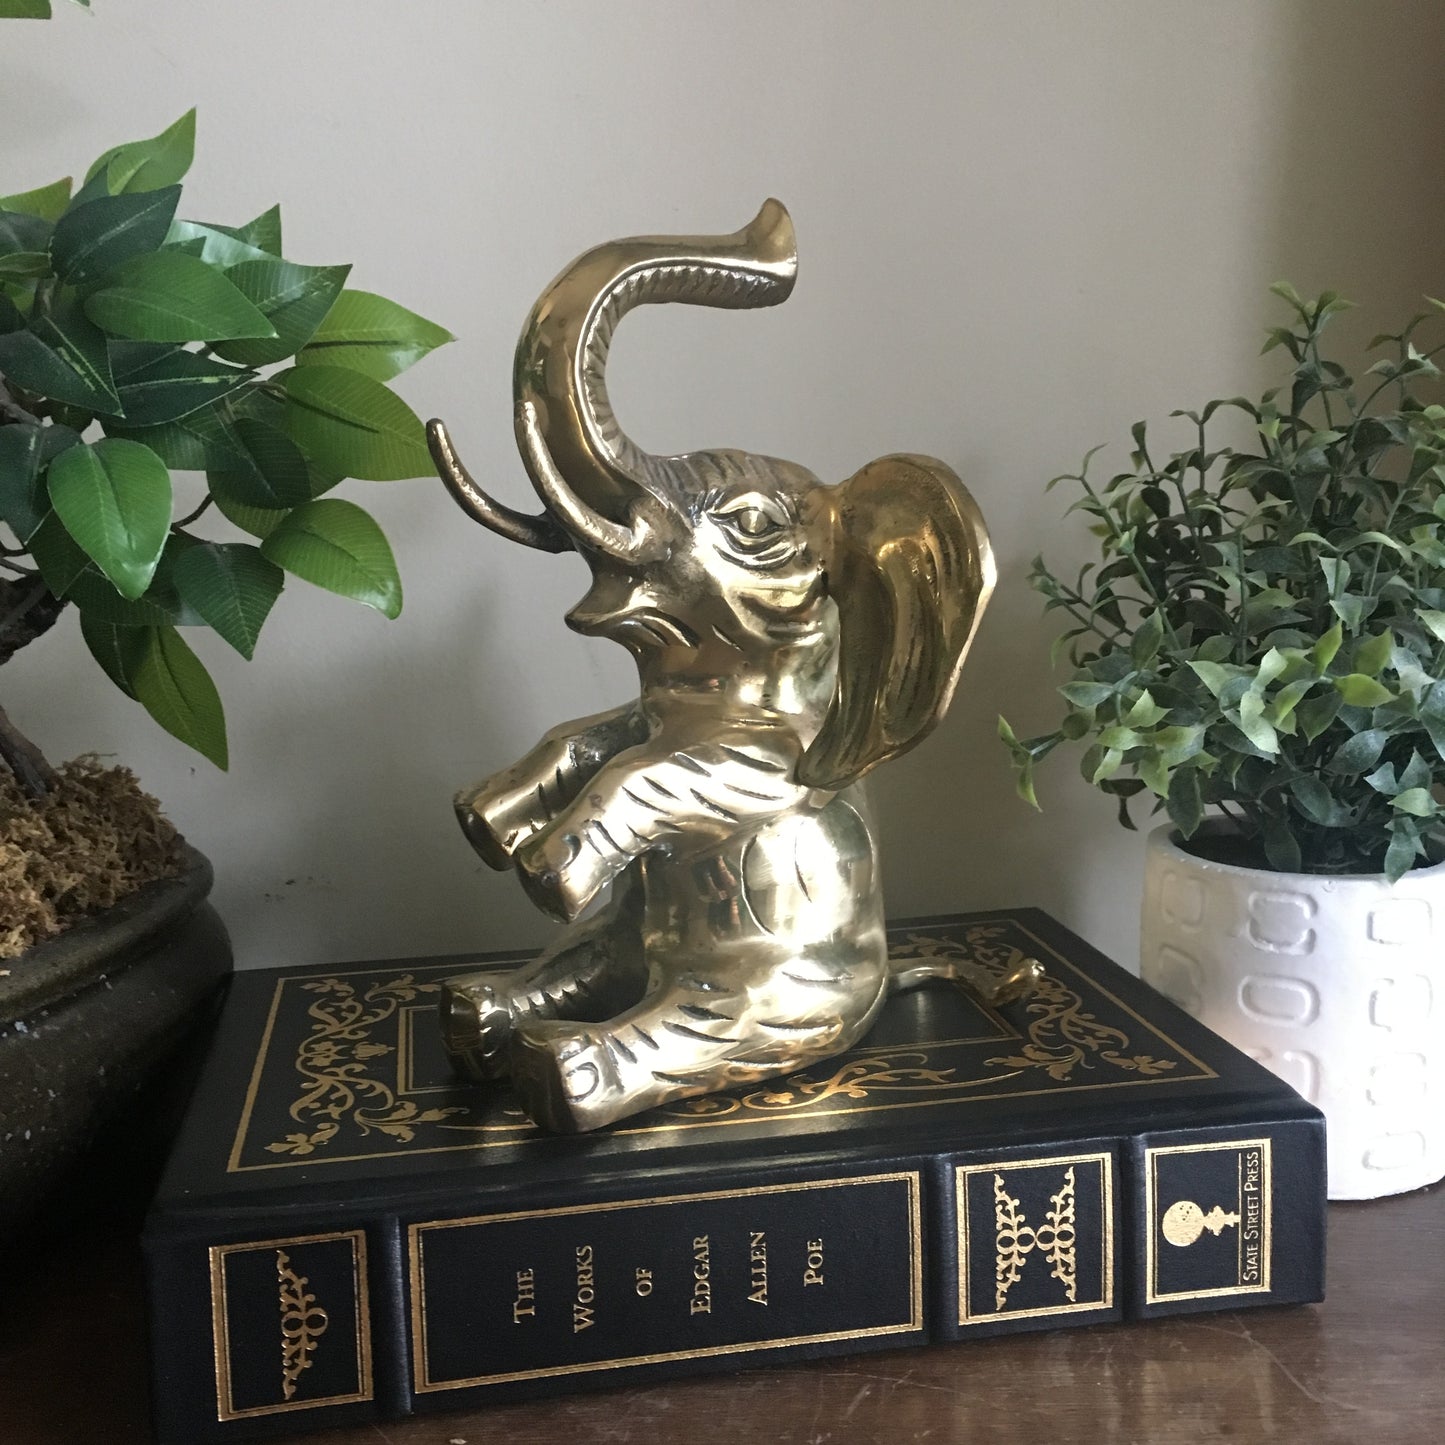 Vintage Brass Sitting Elephant Statue with trunk up